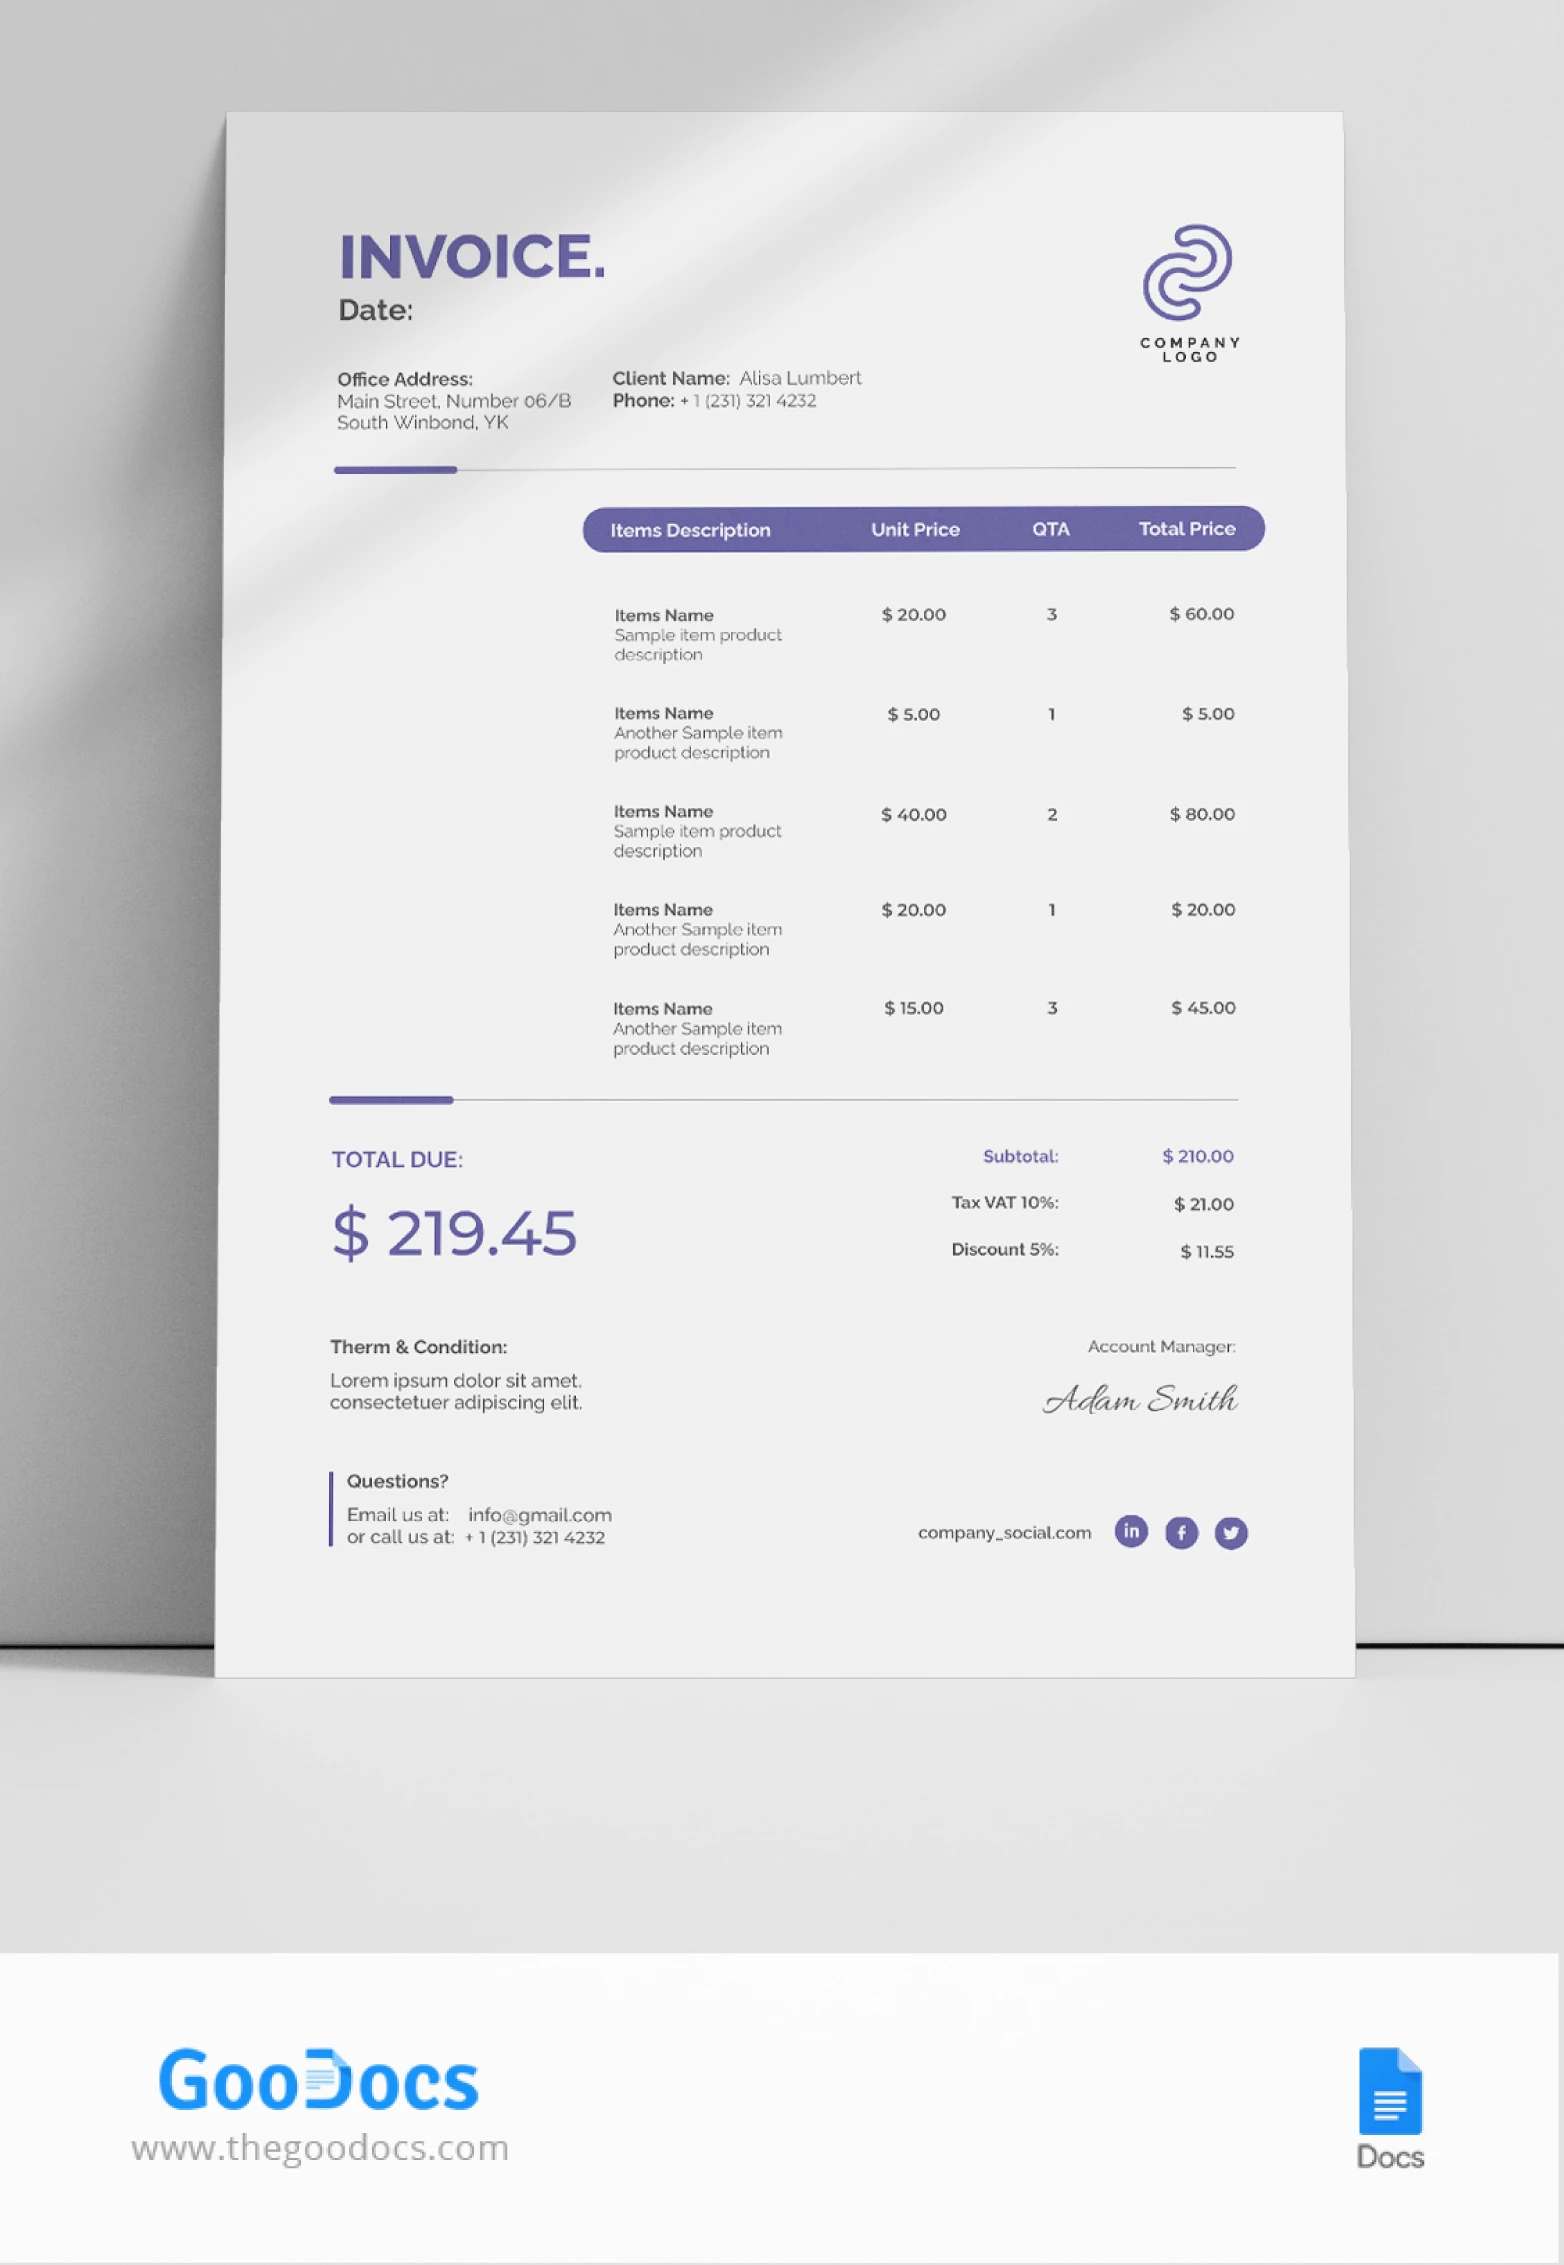 Facture vierge - free Google Docs Template - 10067712